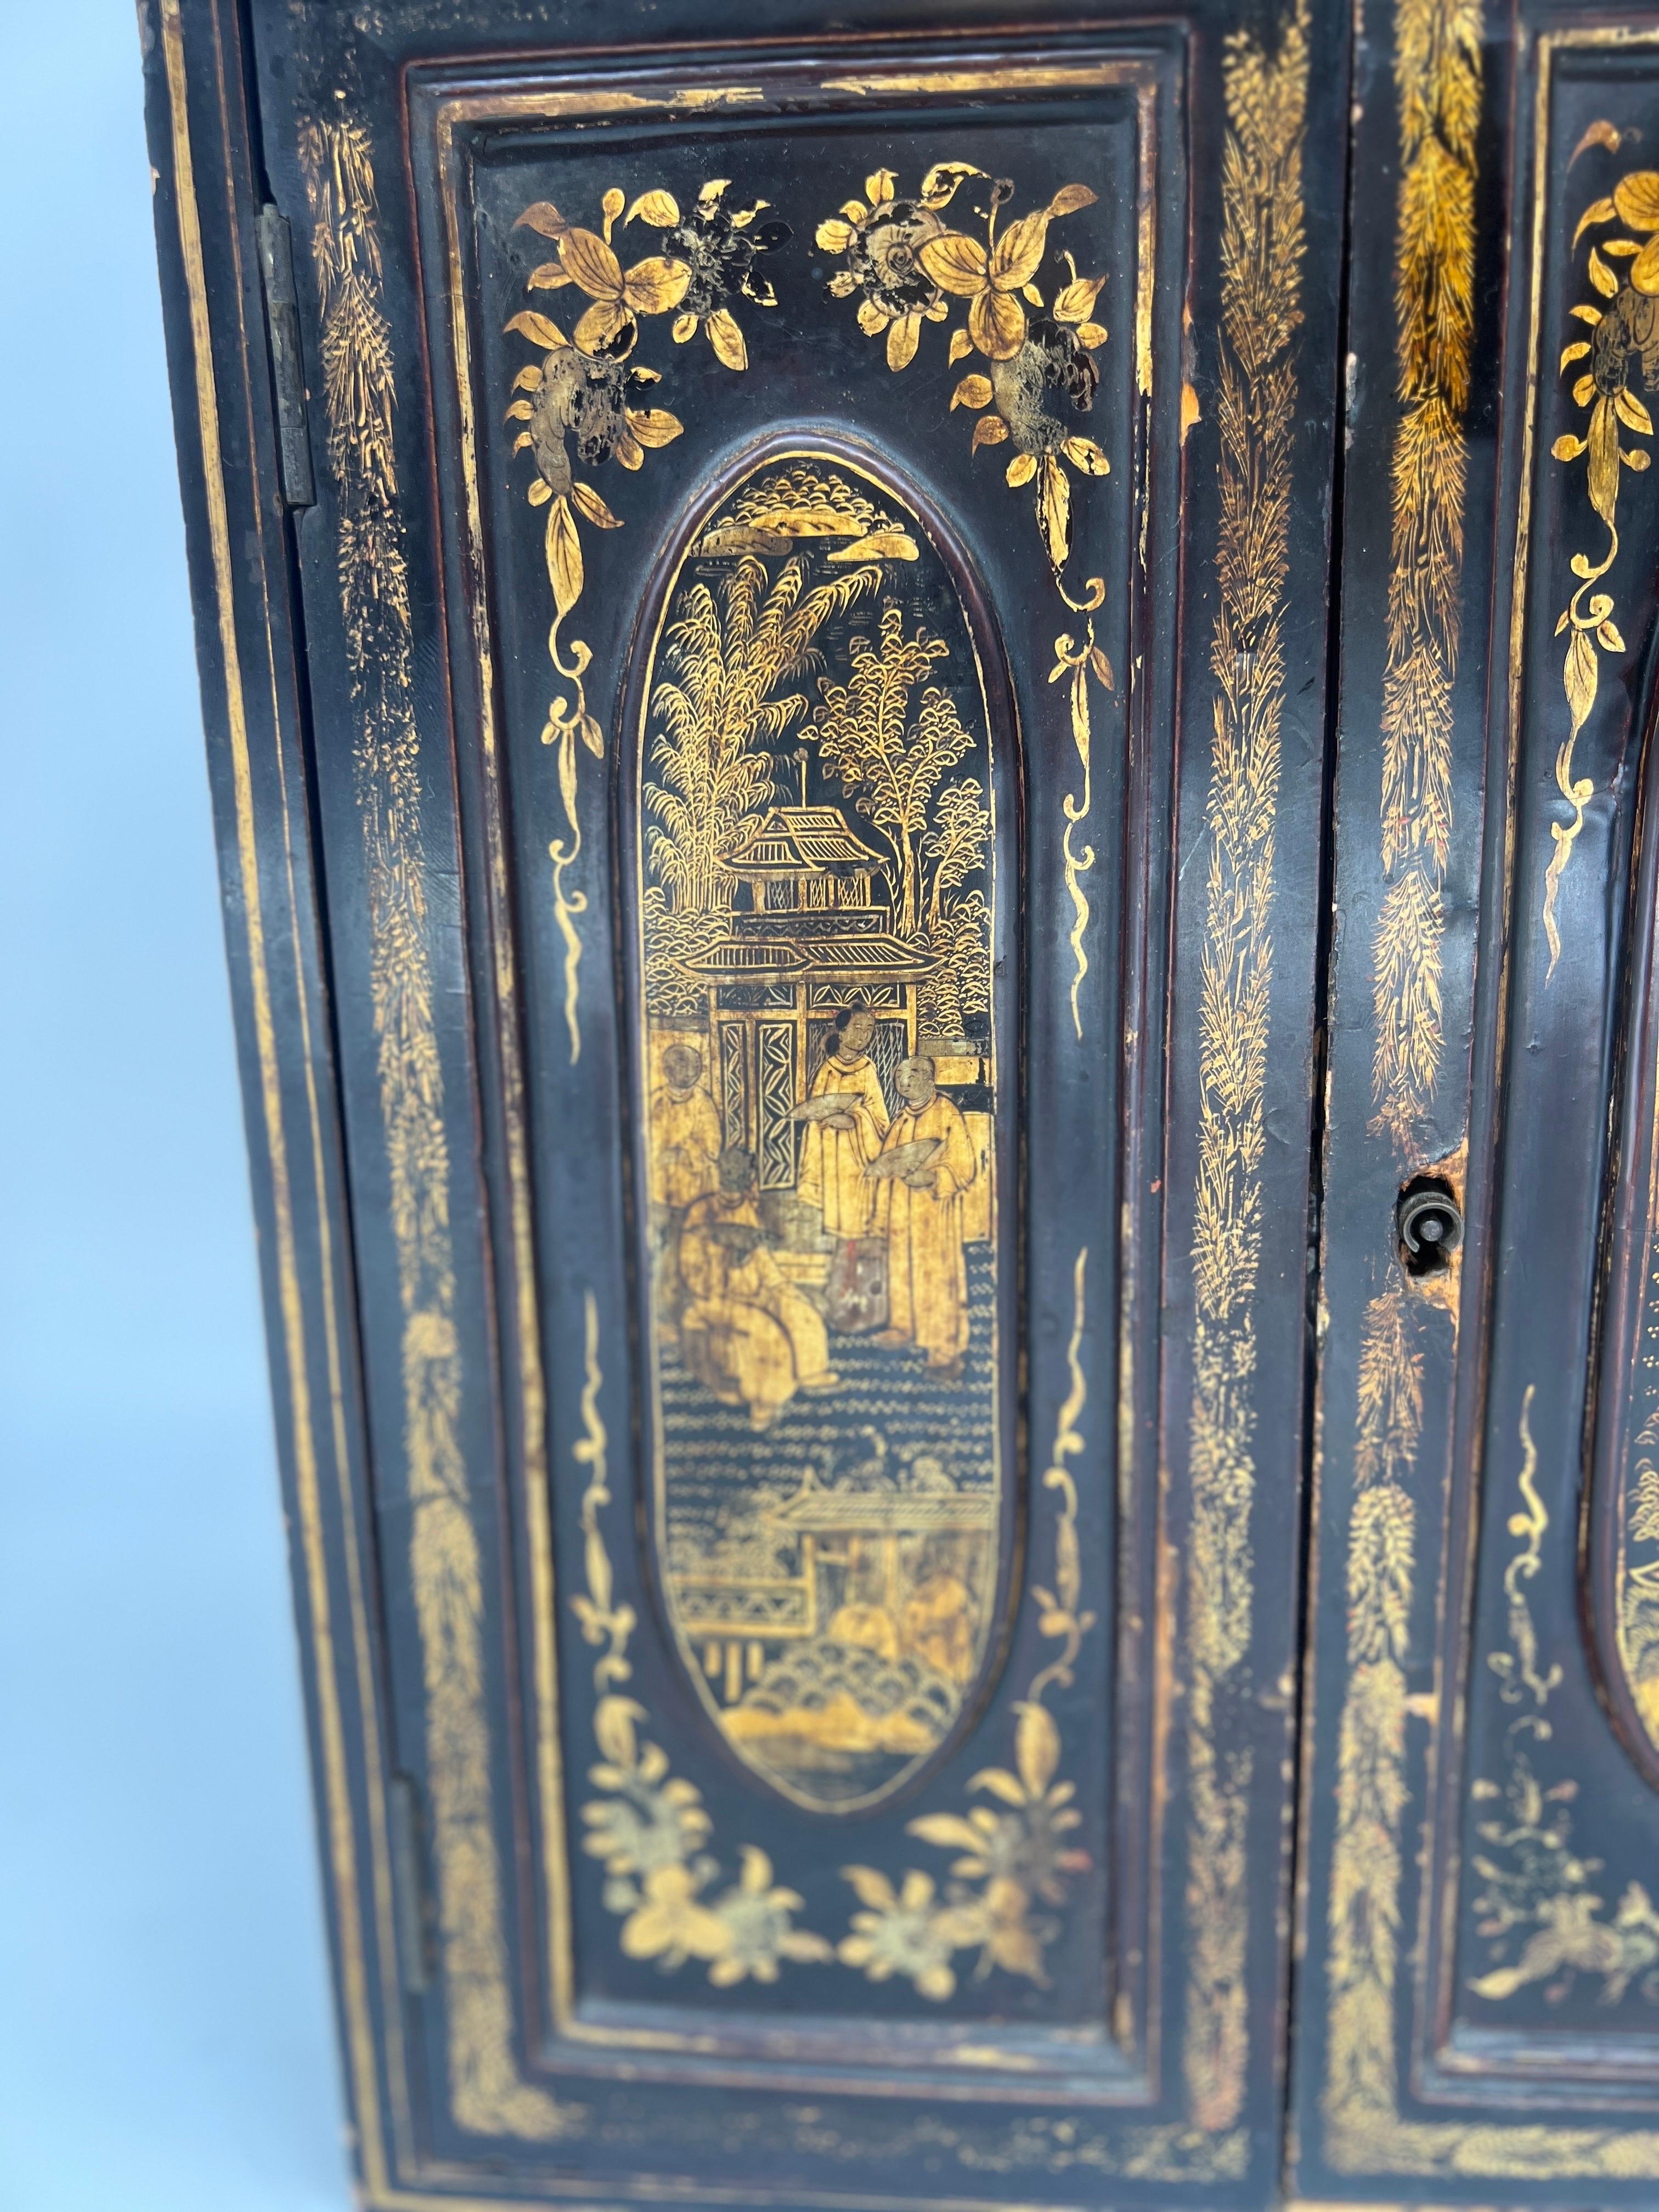 Chinese export, 19th century. This finely lacquer and gilt decorated cabinet features traditional Chinese figures decorated to the body of the two door cabinet. When opened they reveal a 5 drawer interior with round carved bone 